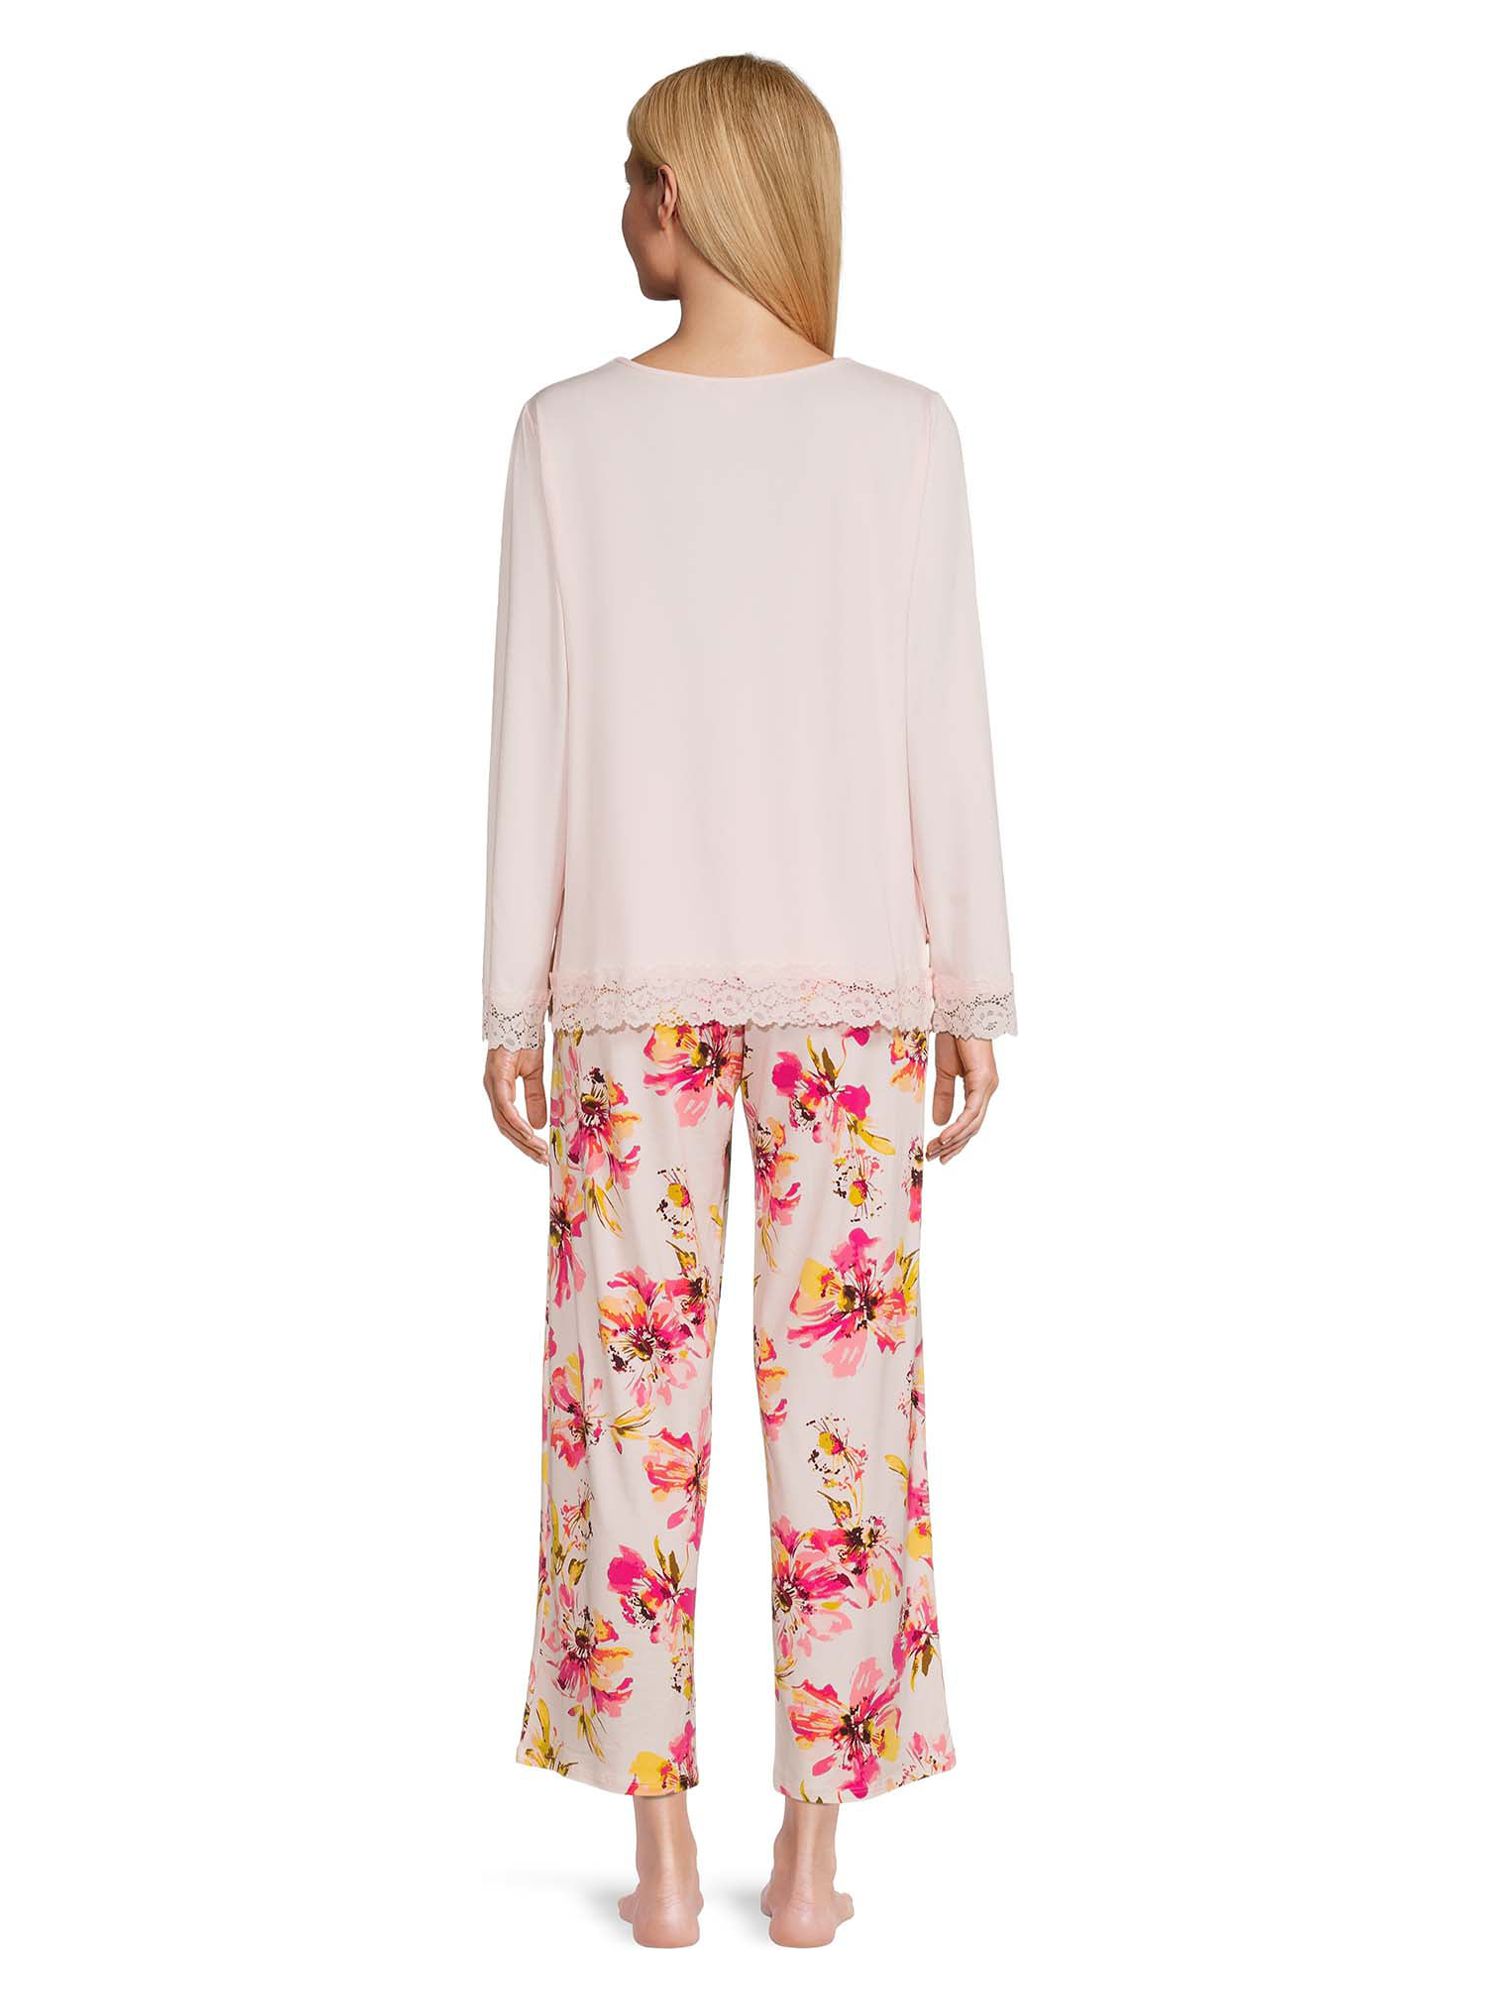 The Pioneer Woman Long Sleeve Top with Lace and Pants Pajama Set, 2-Piece, Women's - image 4 of 6